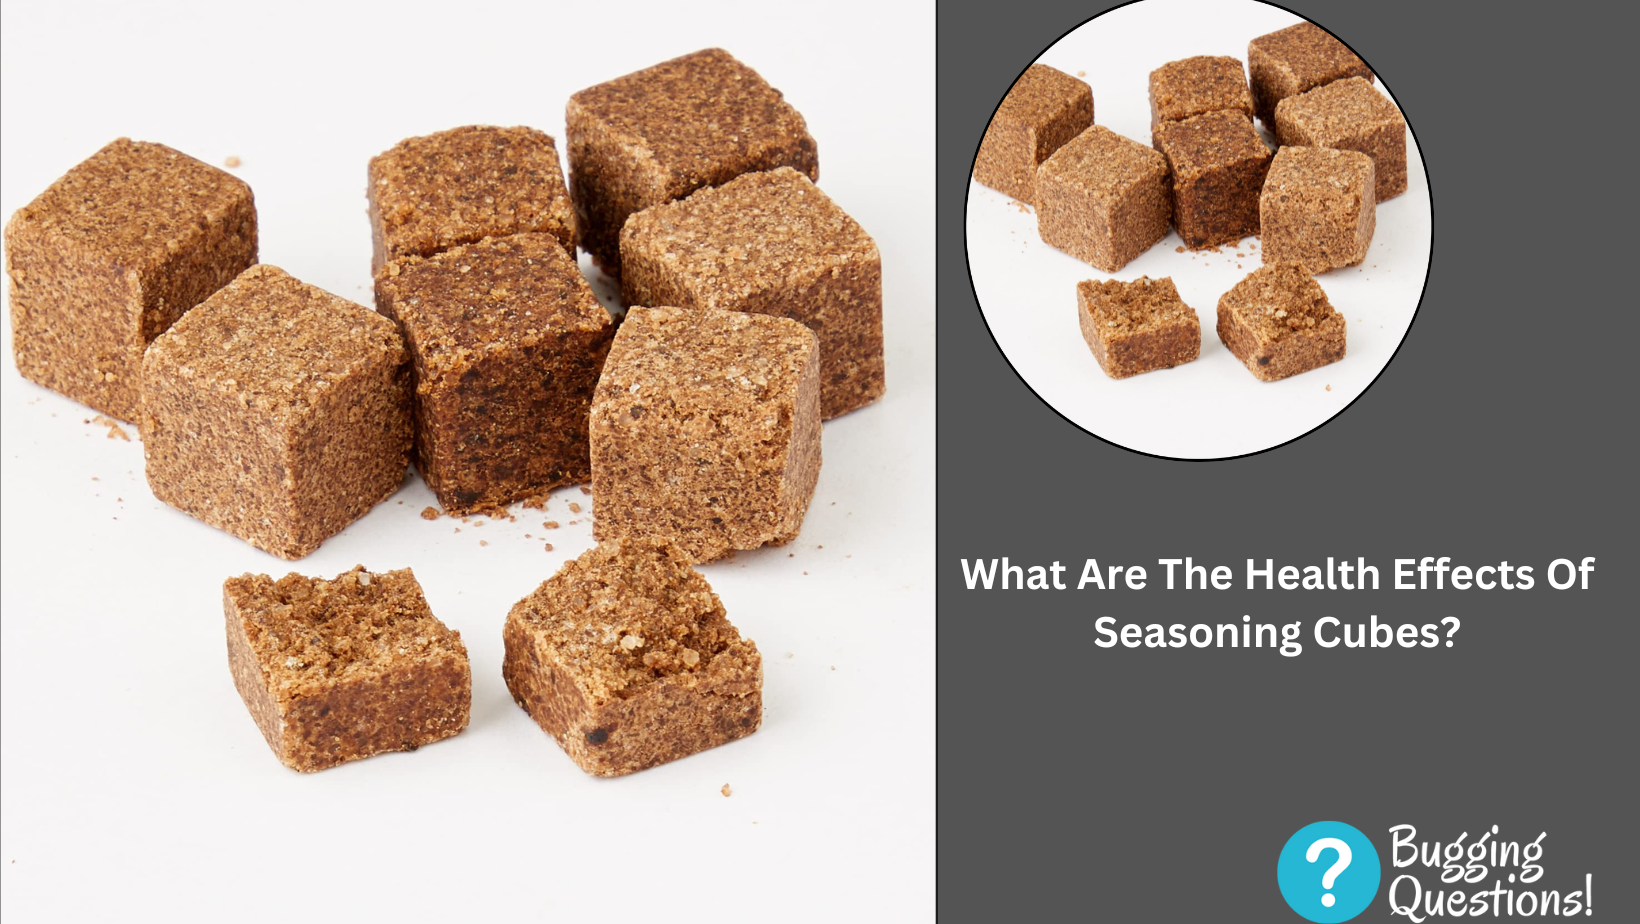 What Are The Health Effects Of Seasoning Cubes?